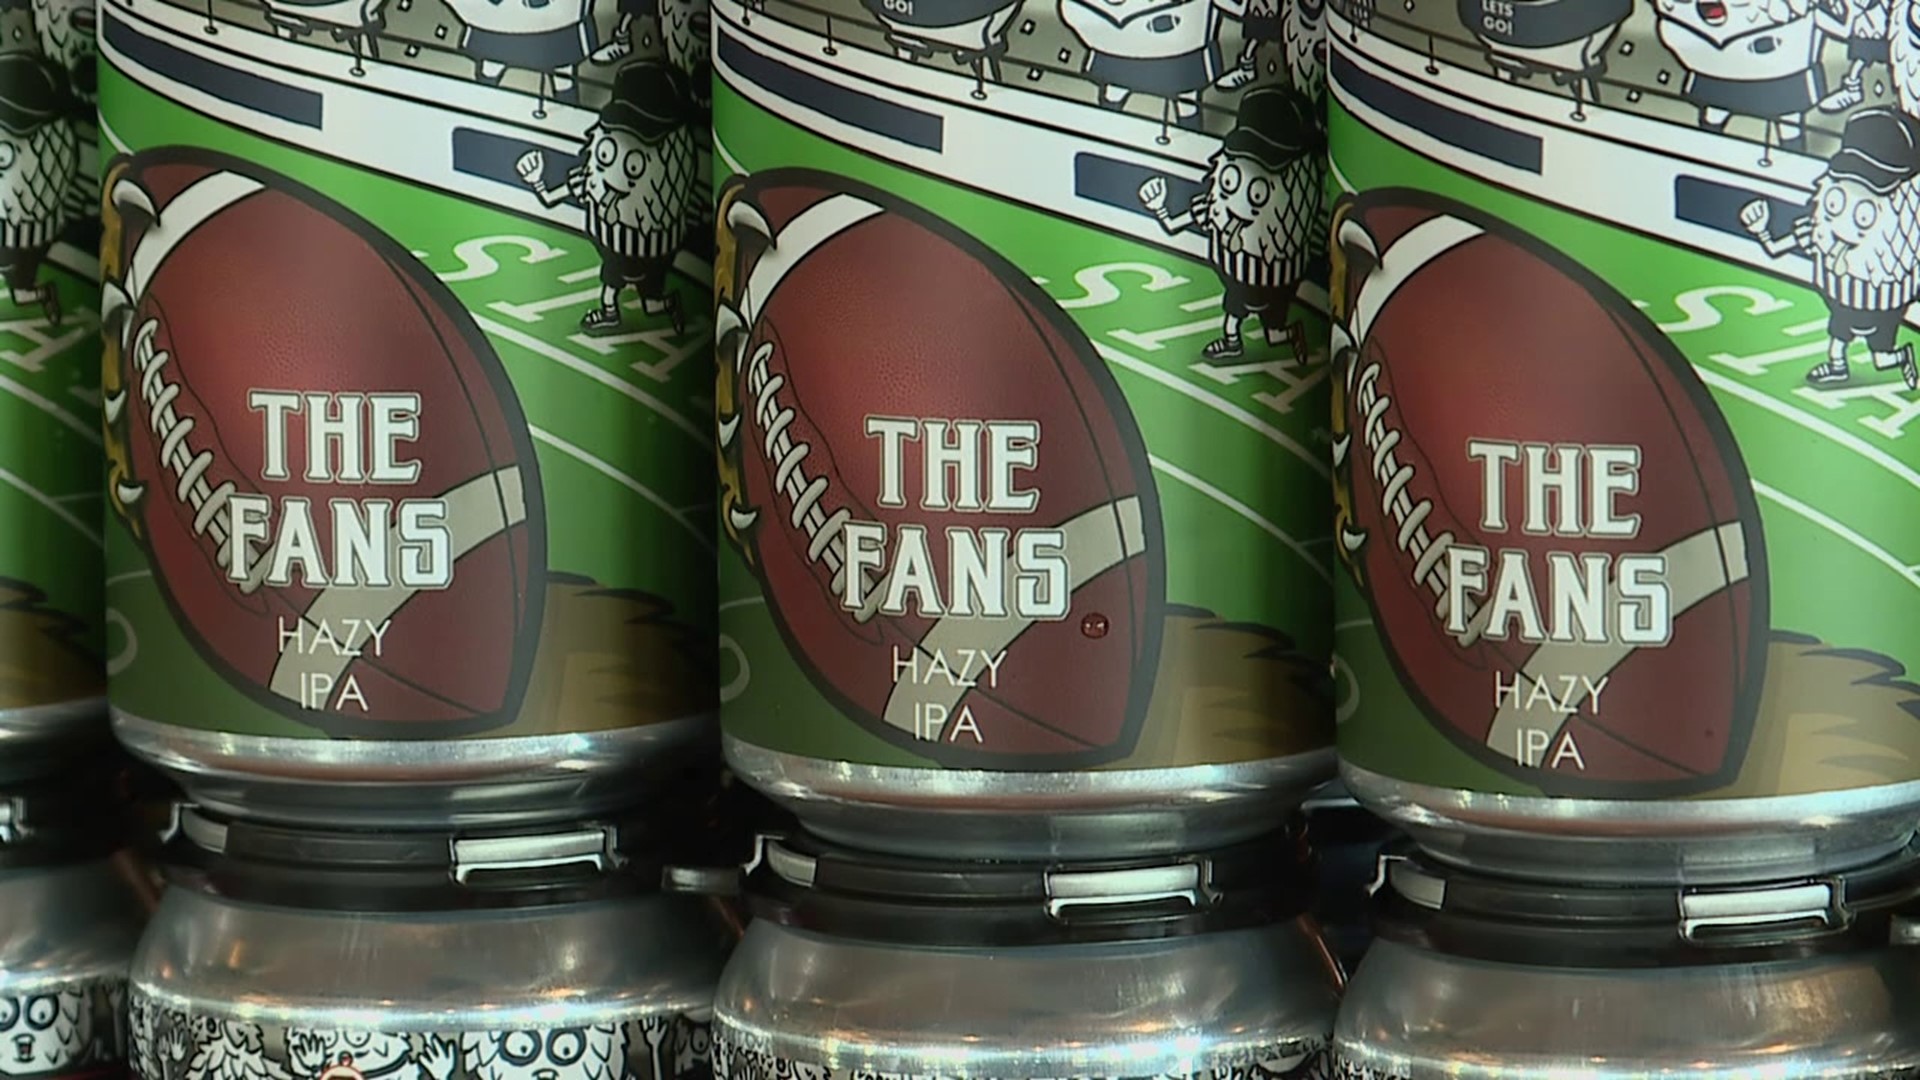 Newswatch 16's Chris Keating visited Rusty Rail Brewing Company to learn more about the new game day brew.